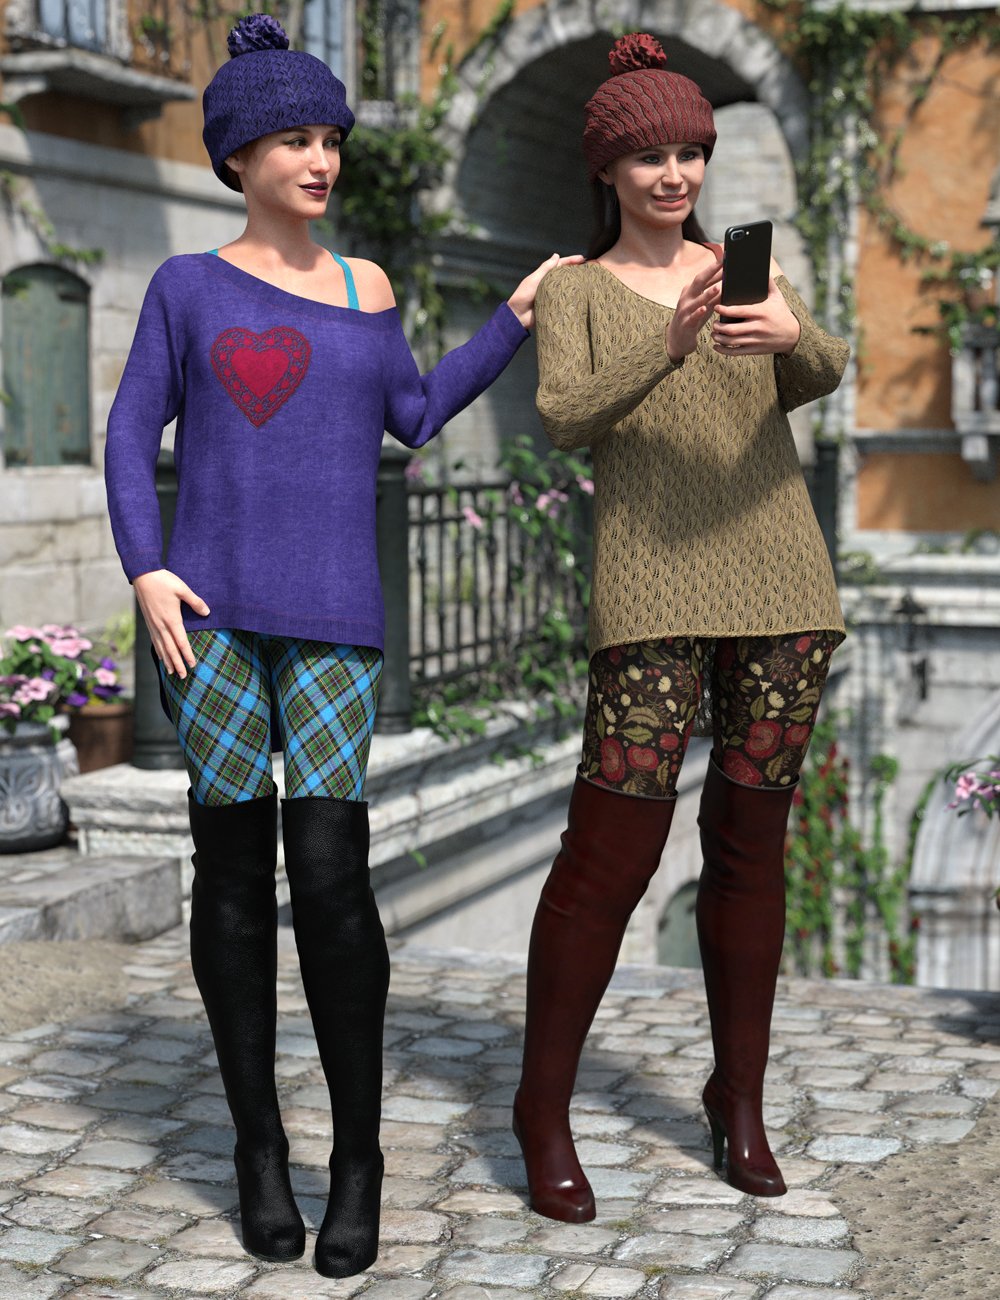 dforce spice of fall outfit textures 00 main daz3d 1 1711985350